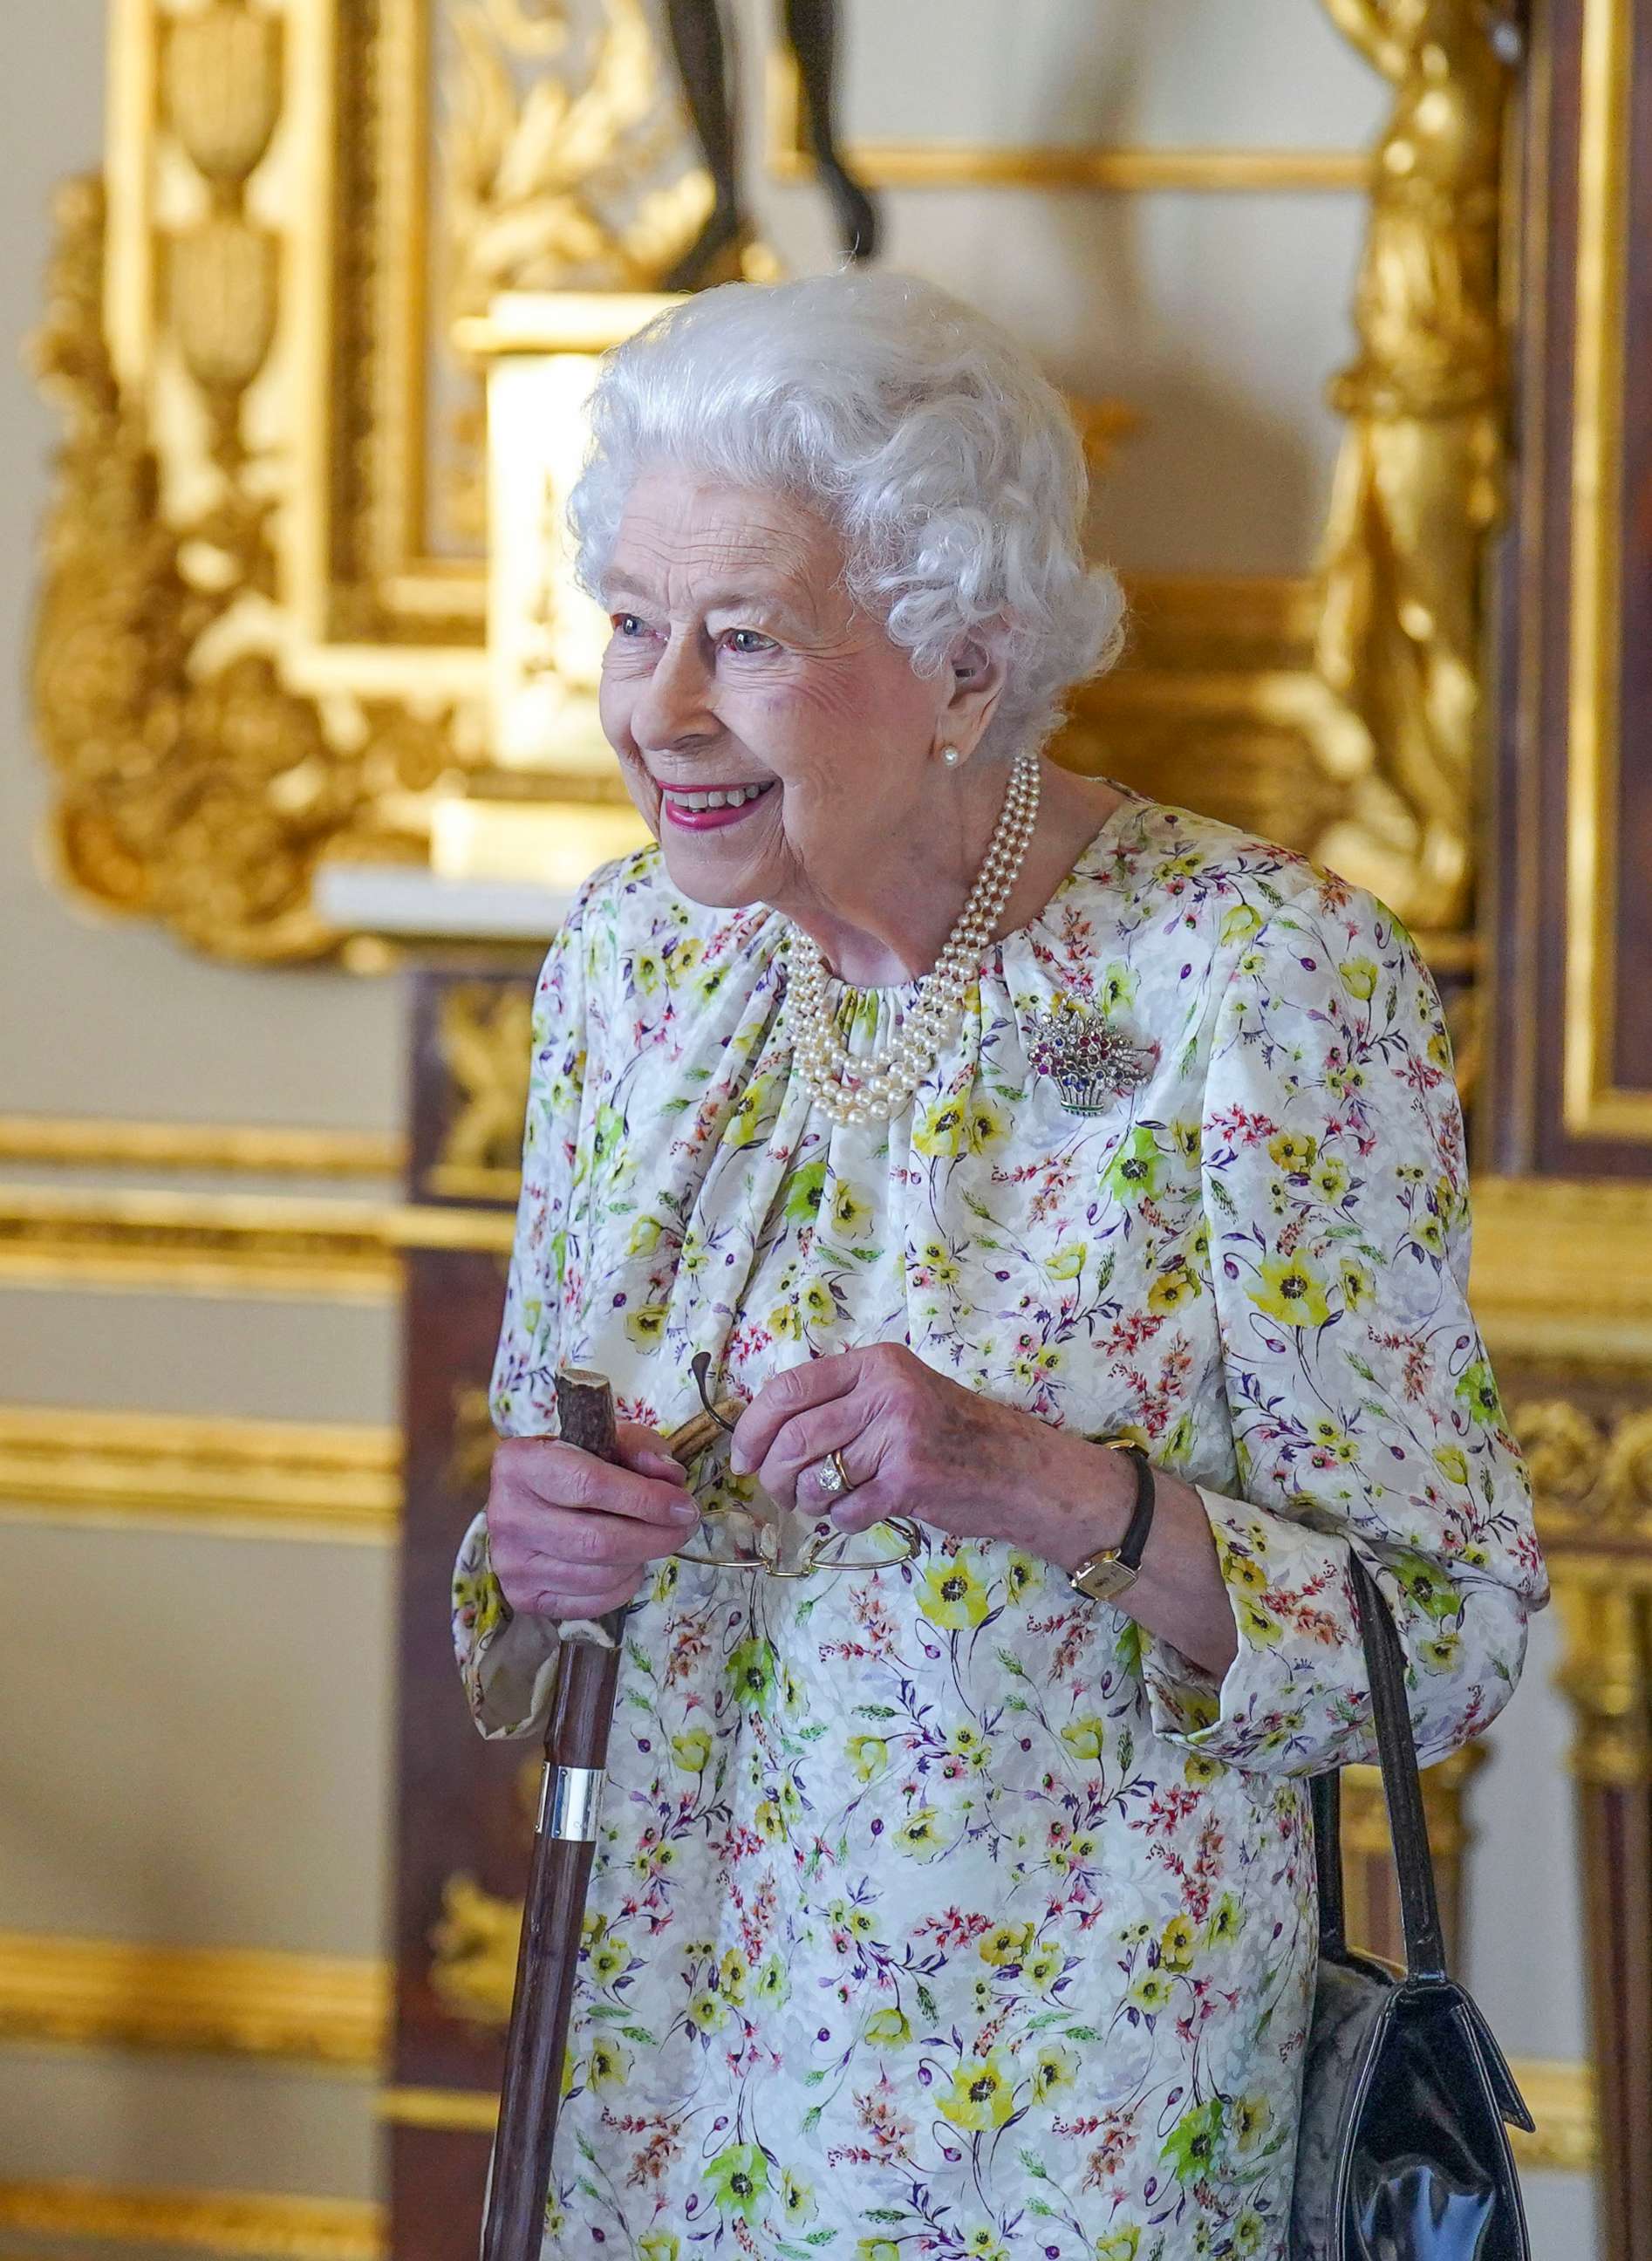 PHOTO: Queen Elizabeth II arrives to view a display of artefacts from British craftwork company, Halcyon Days, to commemorate the company's 70th anniversary in the White Drawing Room at Windsor Castle, on March 23, 2022 in Windsor, England.